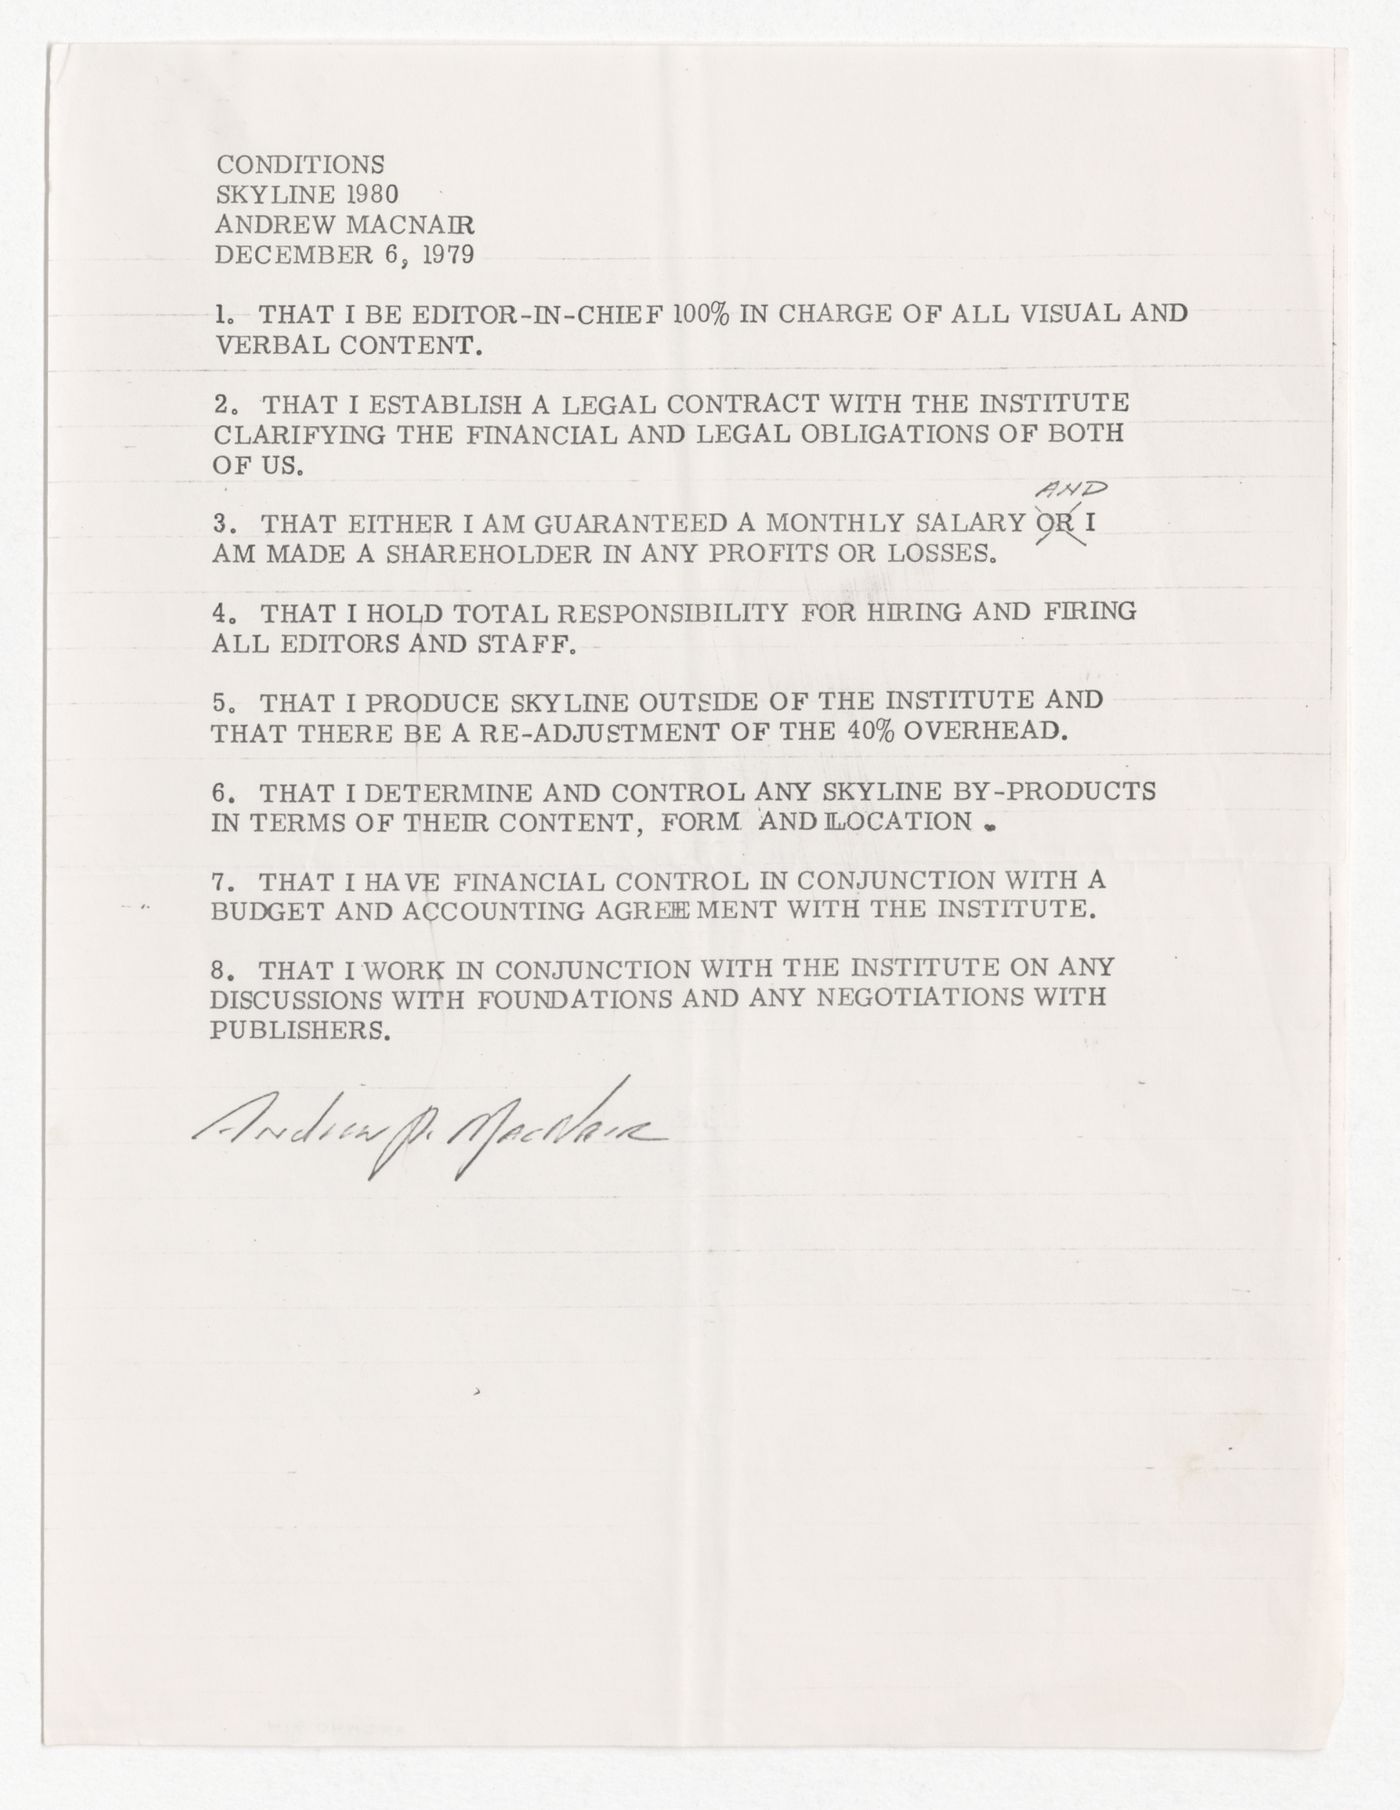 Memorandum from Andrew MacNair about conditions for his employment as editor-in-chief of Skyline